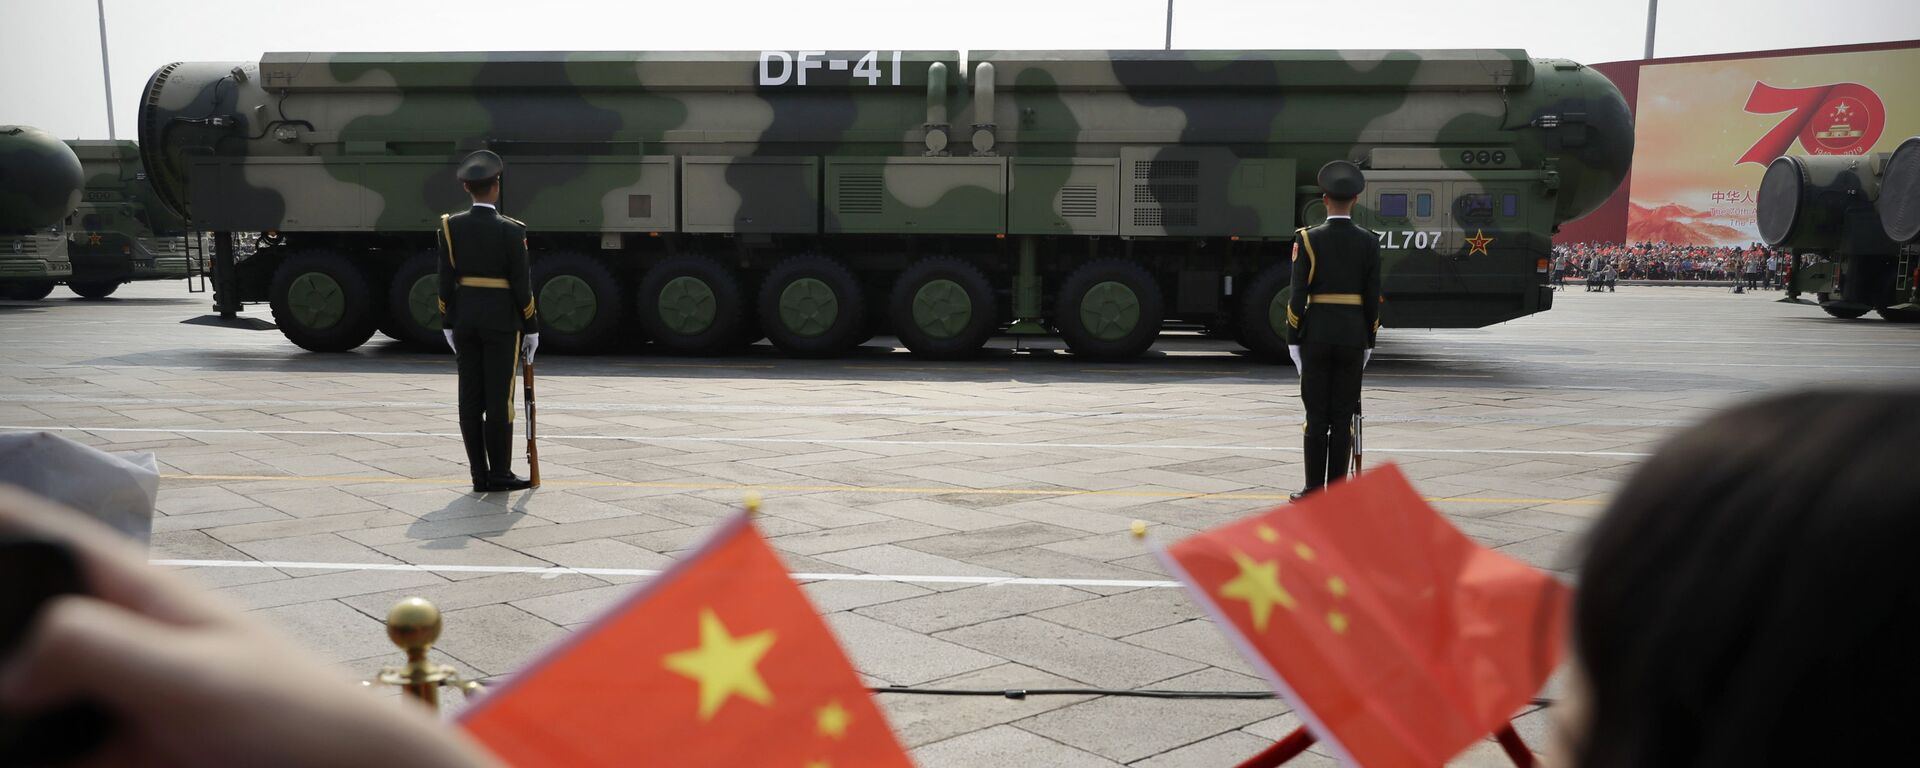 FILE - In this Oct. 1, 2019, file photo spectators wave Chinese flags as military vehicles carrying DF-41 ballistic missiles roll during a parade to commemorate the 70th anniversary of the founding of Communist China in Beijing. Trucks carrying weapons including a nuclear-armed missile designed to evade U.S. defenses rumbled through Beijing as the Communist Party celebrated its 70th anniversary in power - Sputnik International, 1920, 01.03.2021